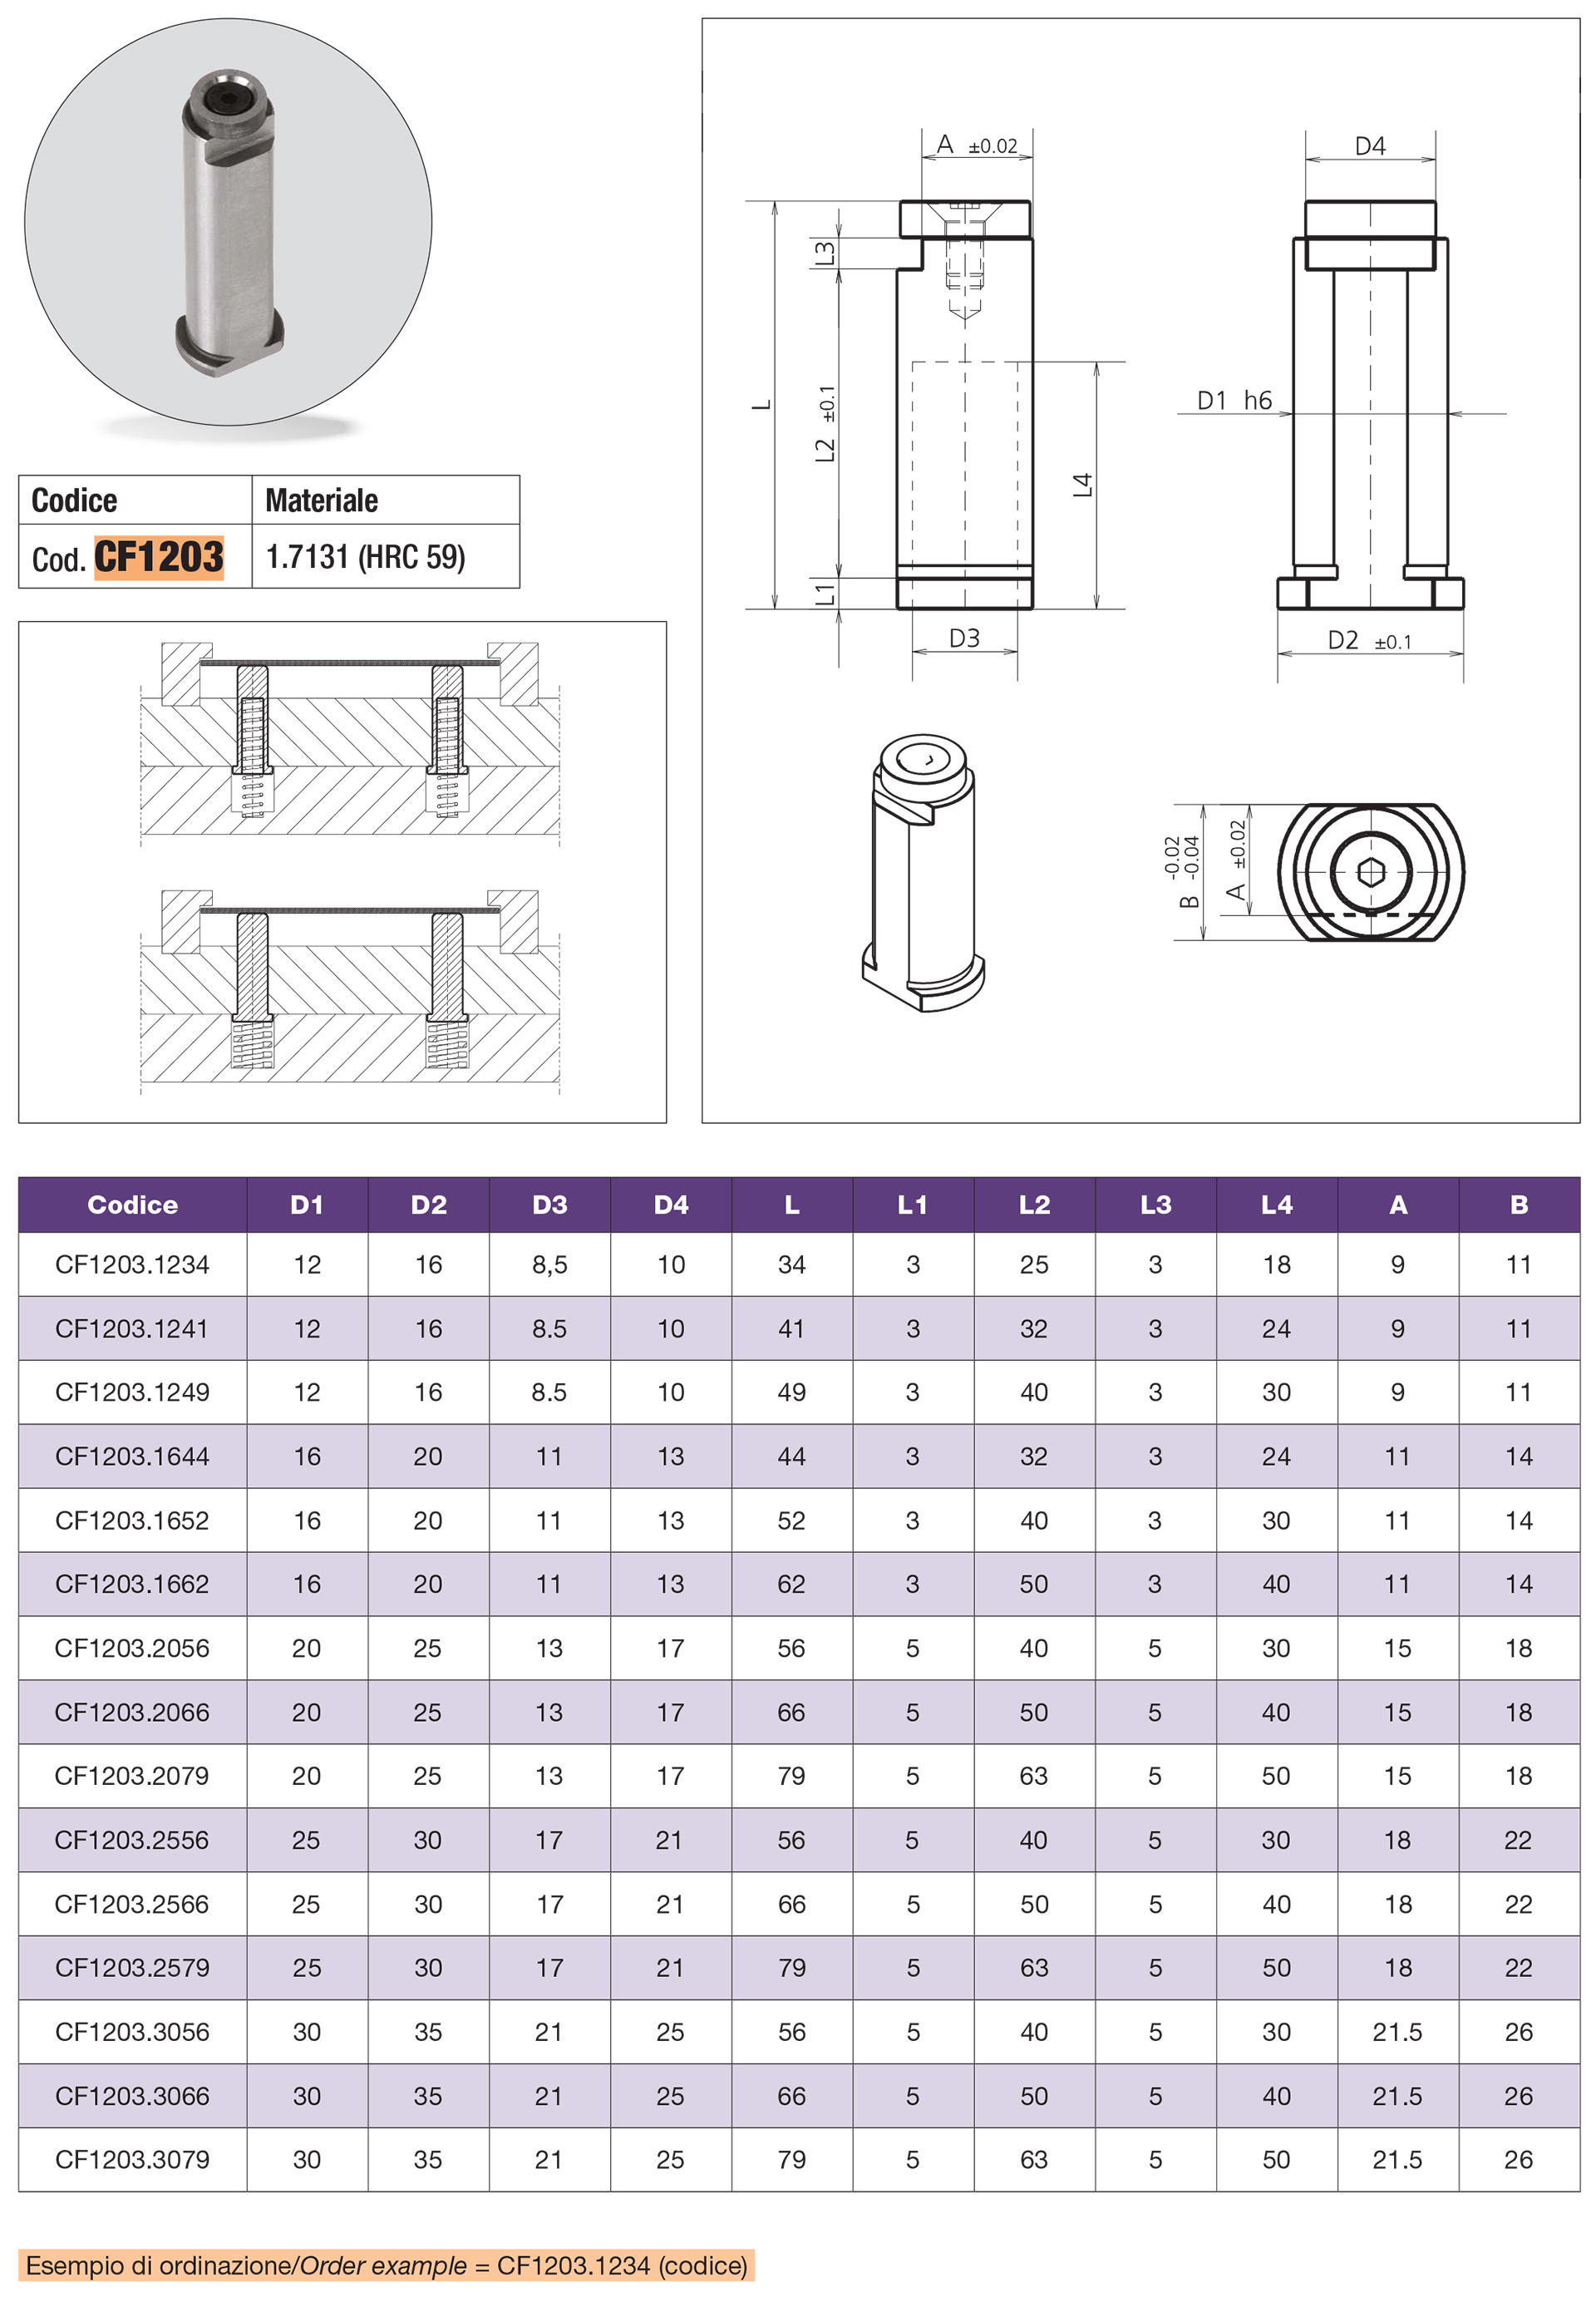 Lifters-metal strip guide with antirotation system